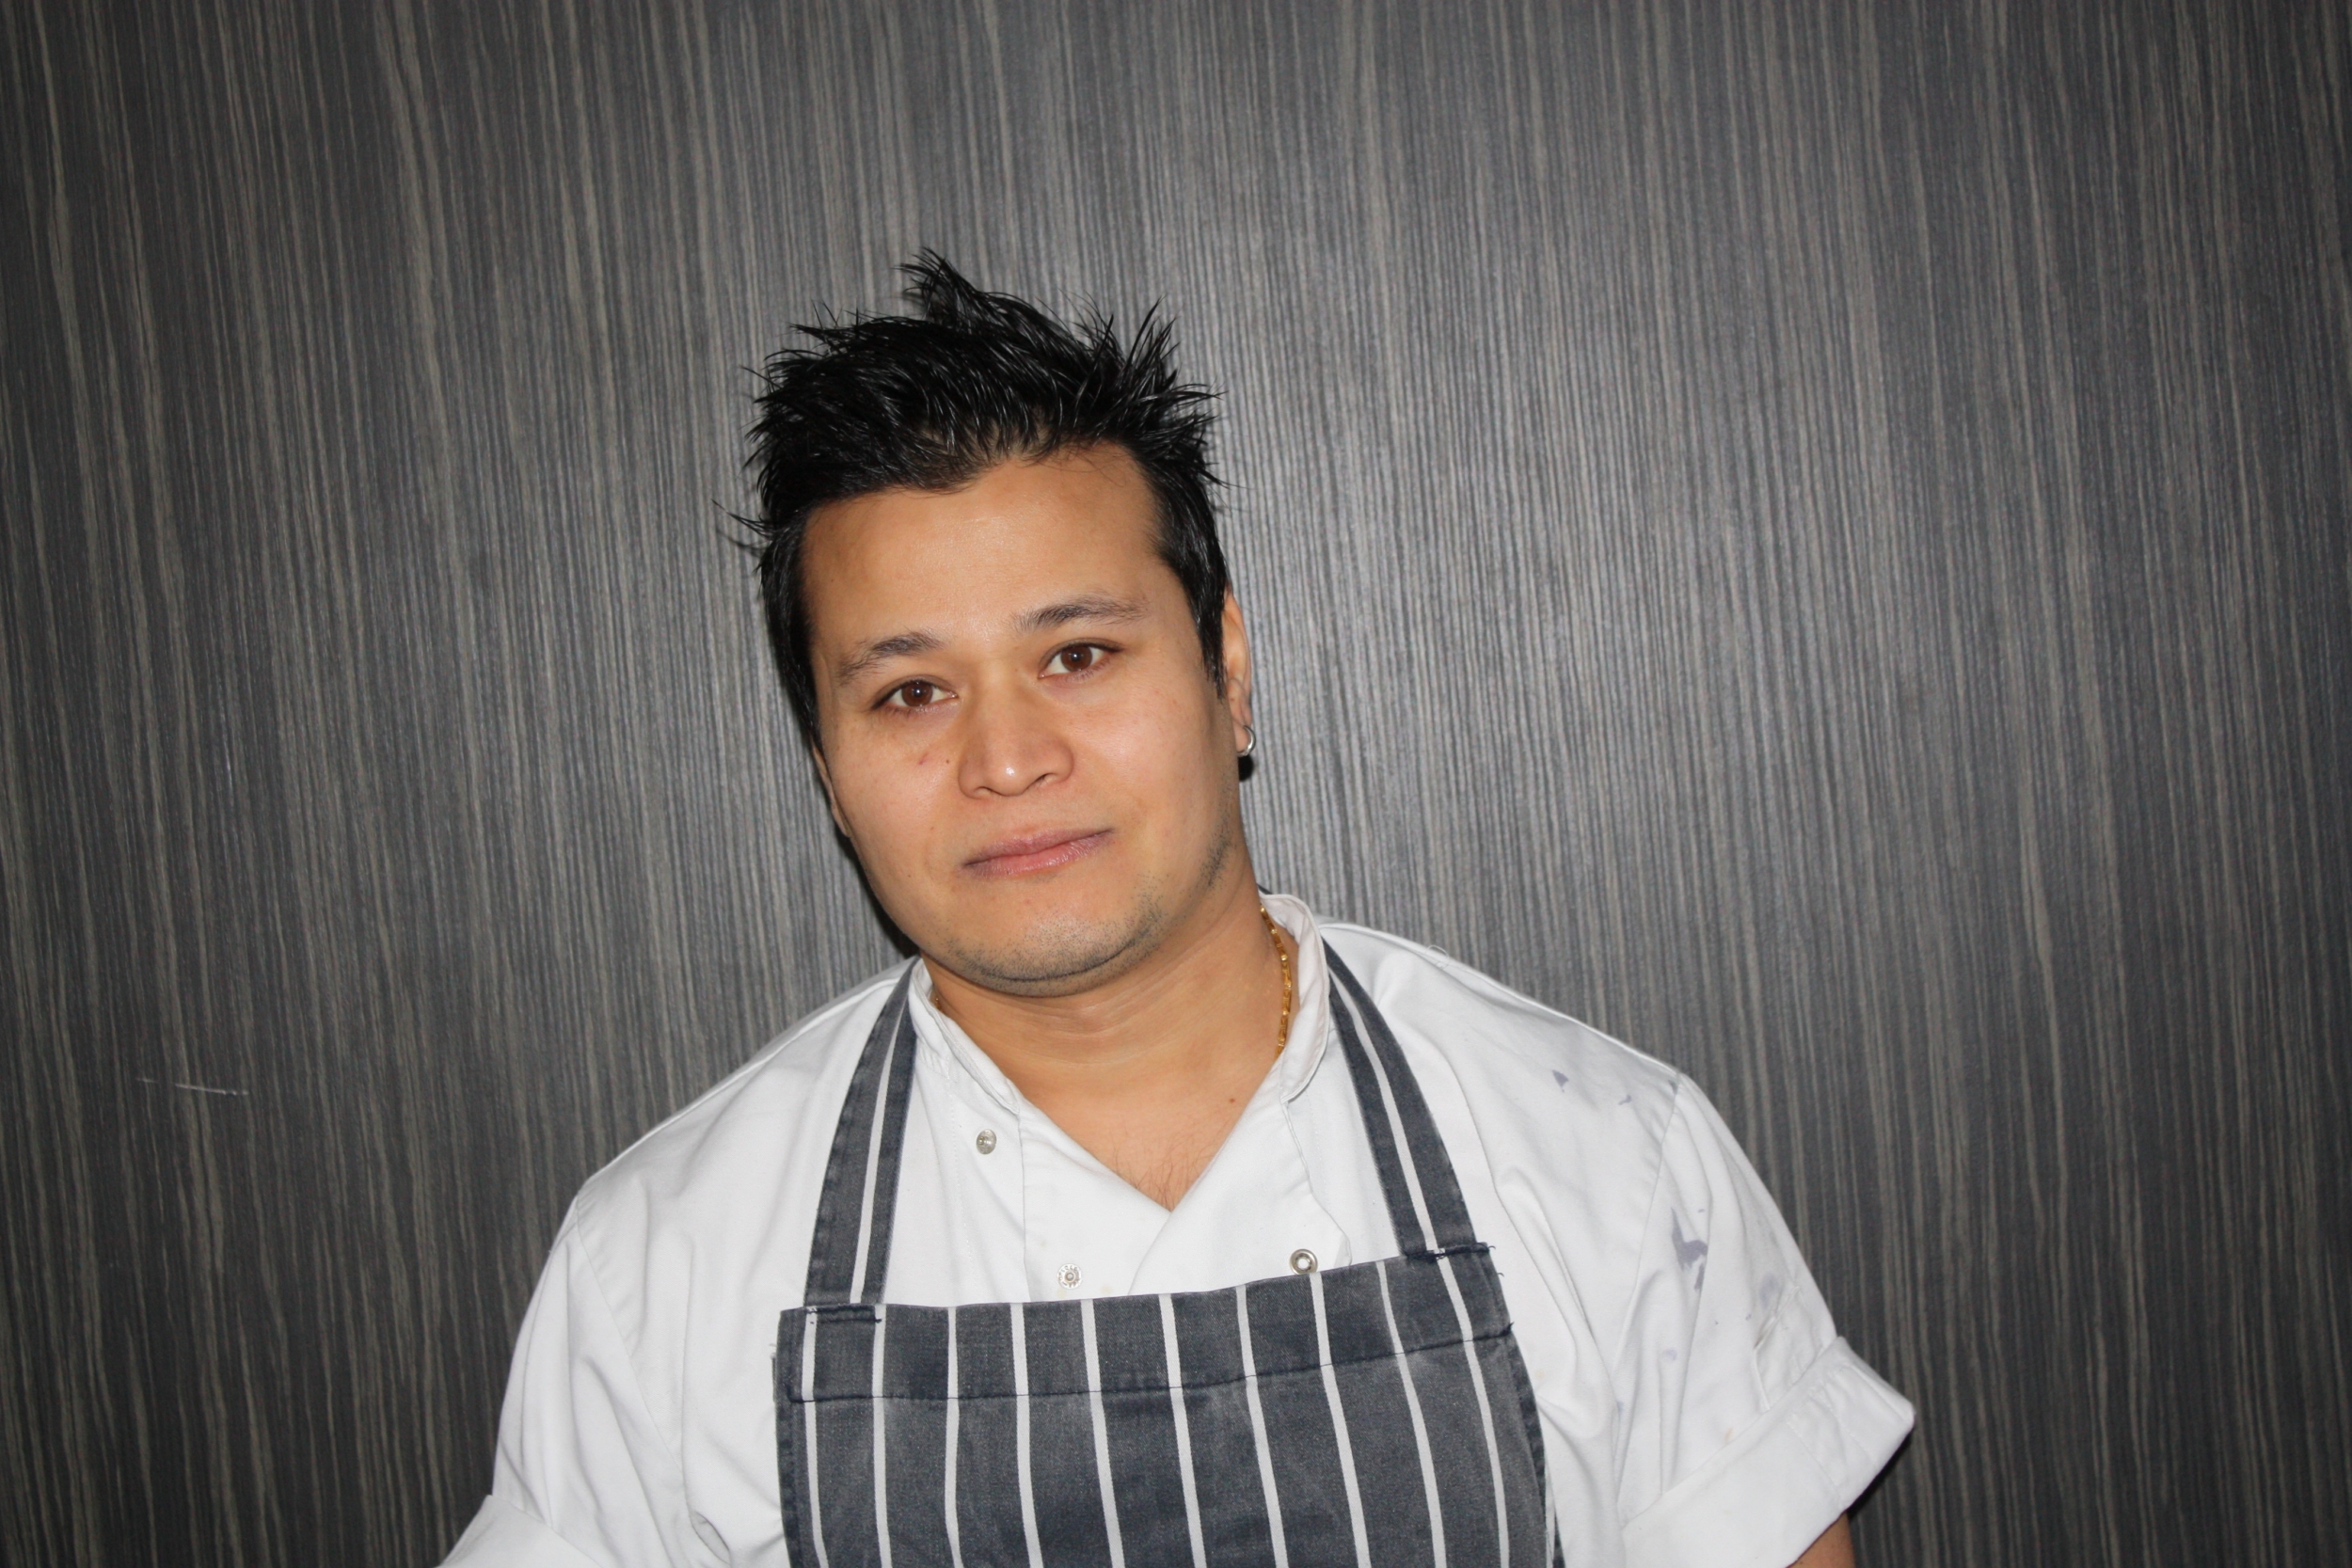 Rabin Shrstha - Head Chef at Badgemore Park in Henley-on-Thames